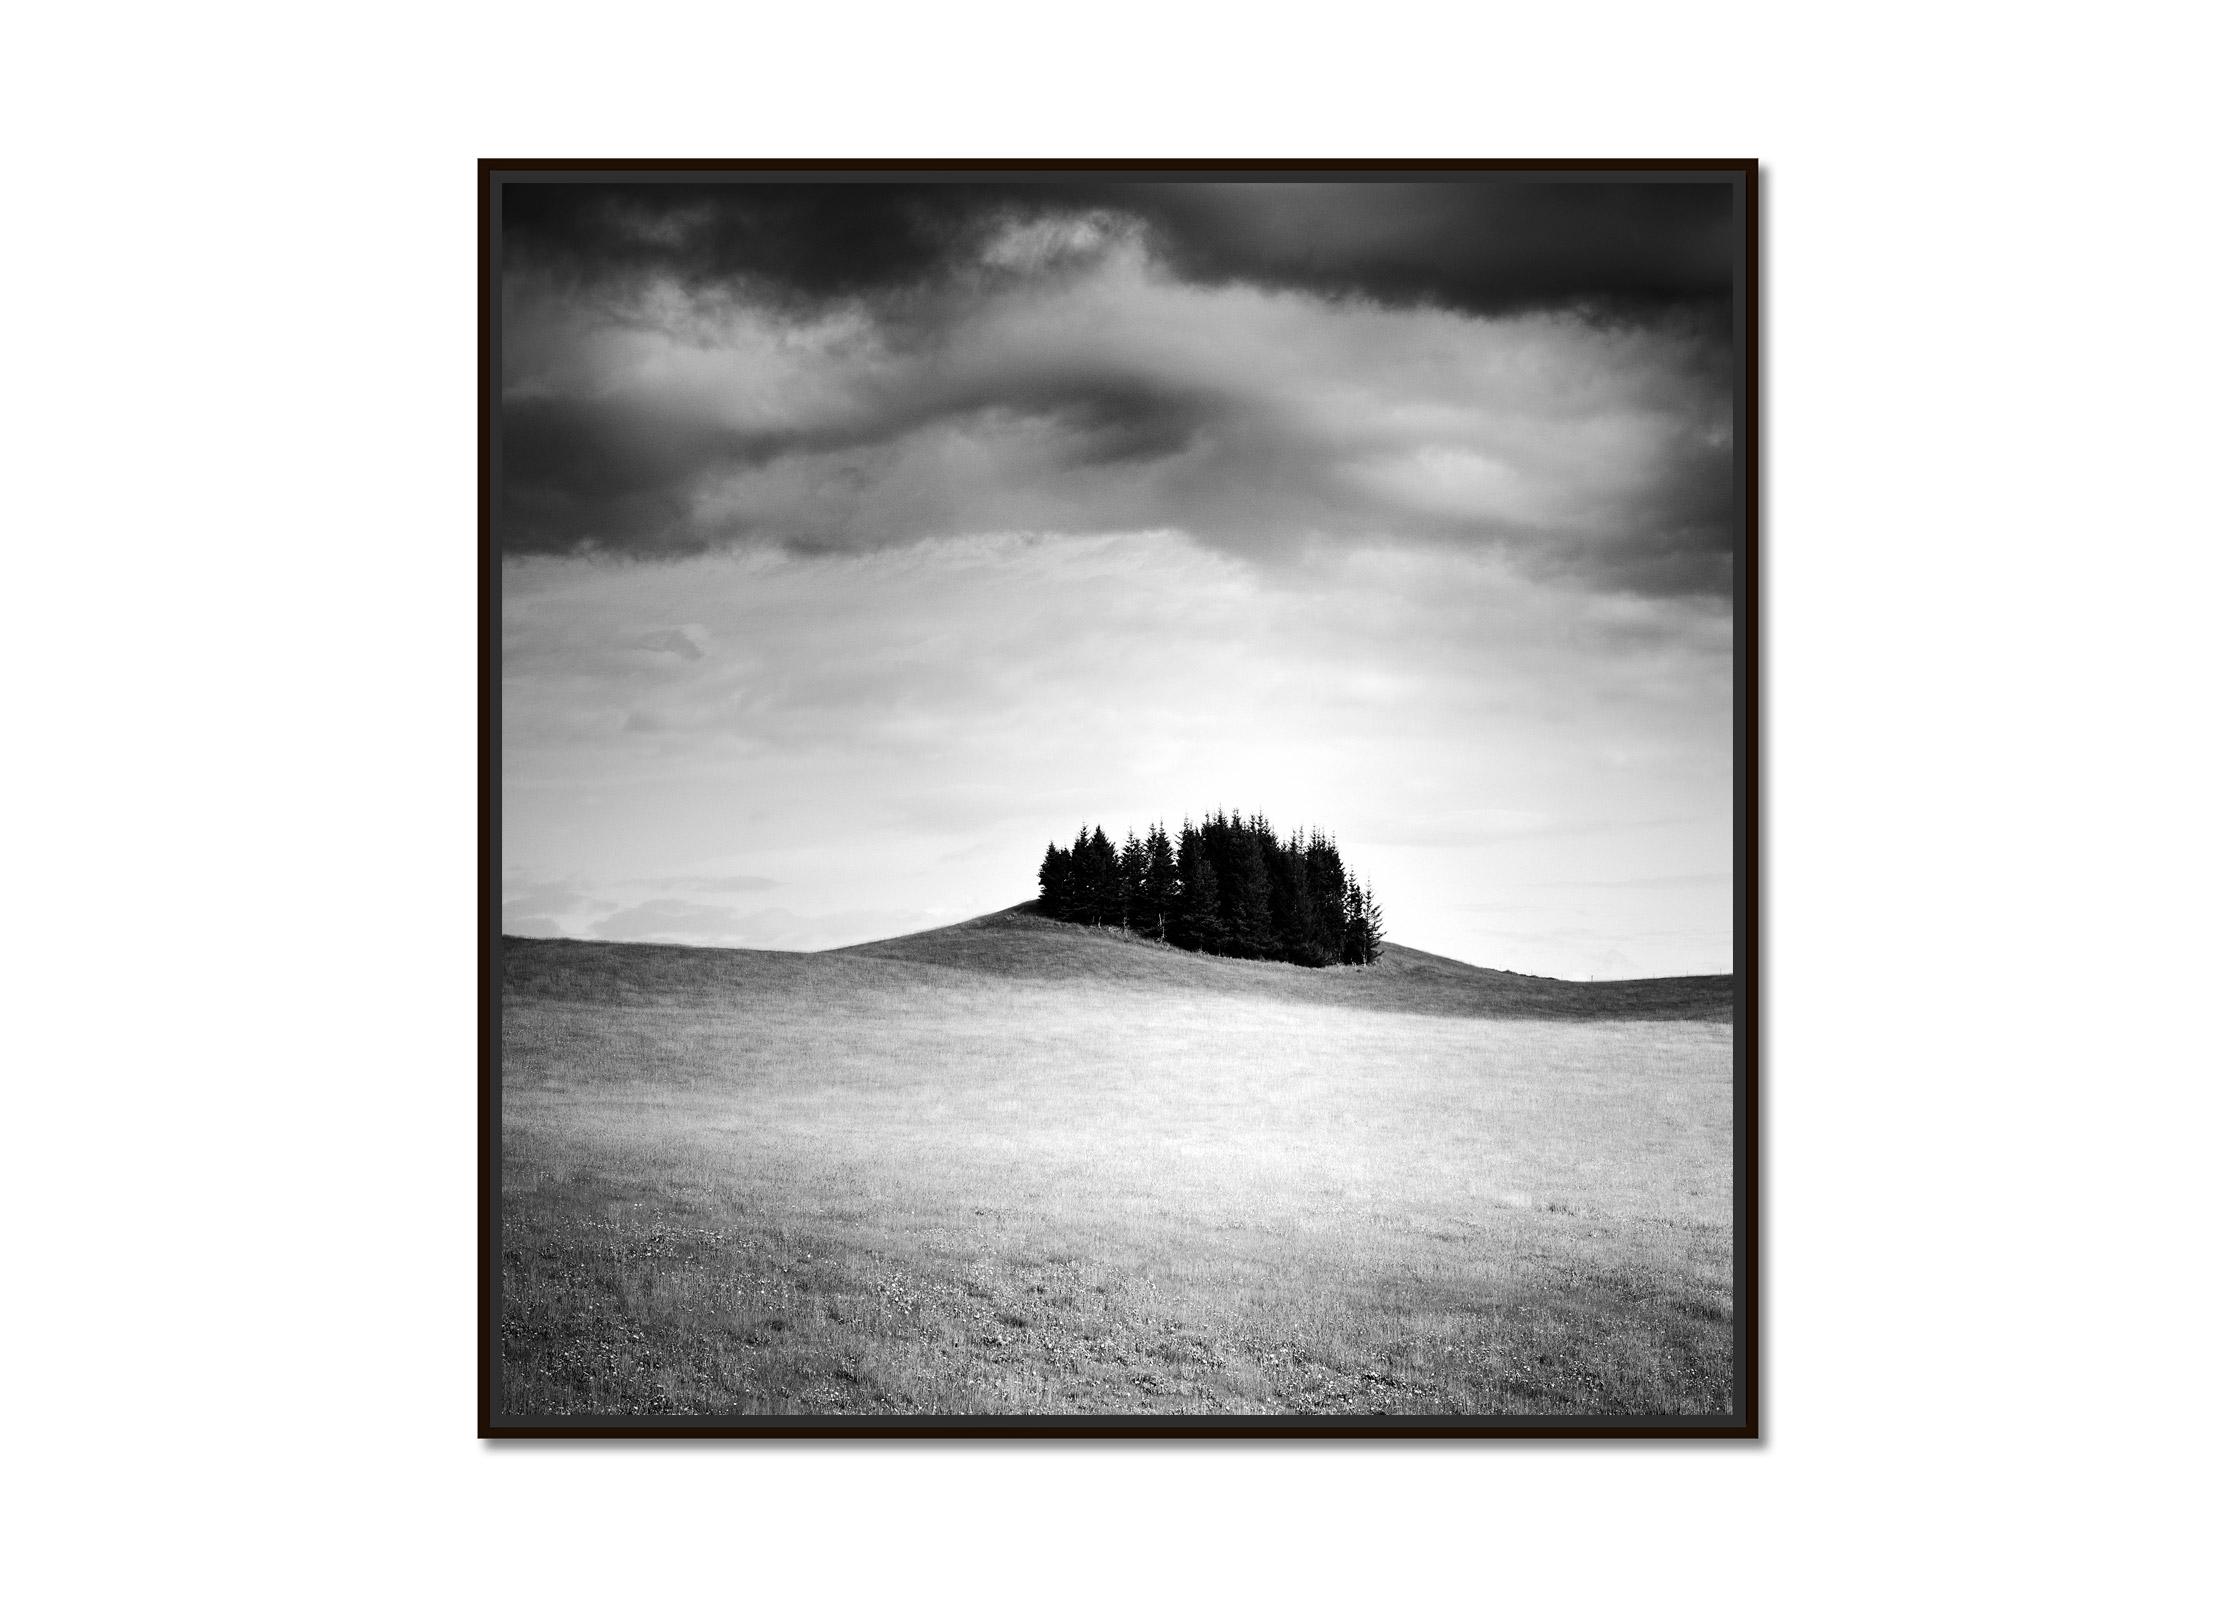 Little Green Island, Iceland black and white landscape, photography, fine art  - Photograph by Gerald Berghammer, Ina Forstinger